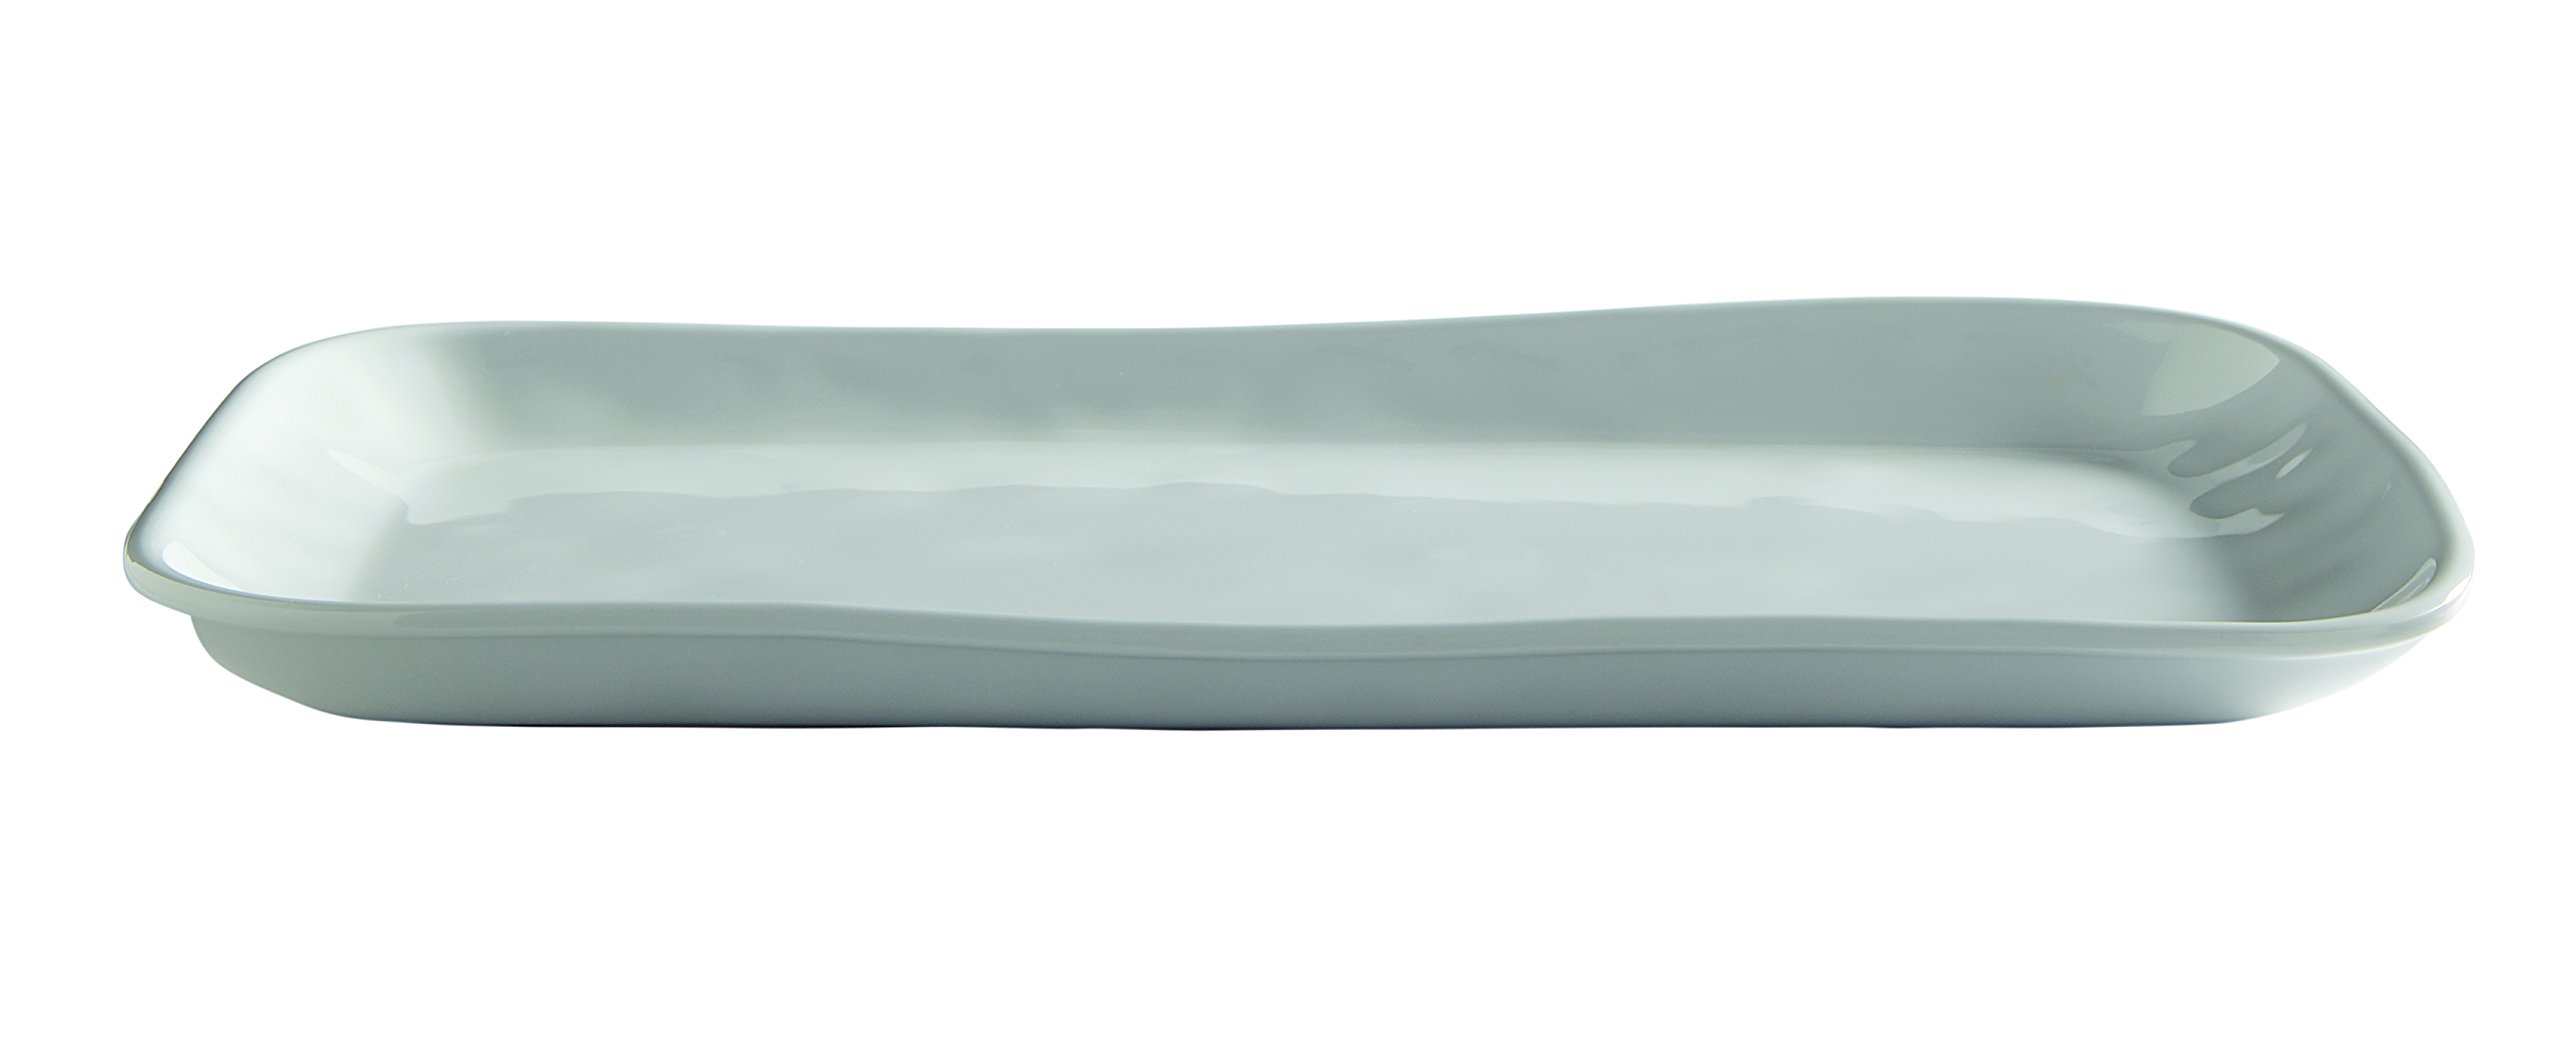 American Metalcraft CP12CL Rectangular Platter, Cloud, Crave Collection, 12-Inches